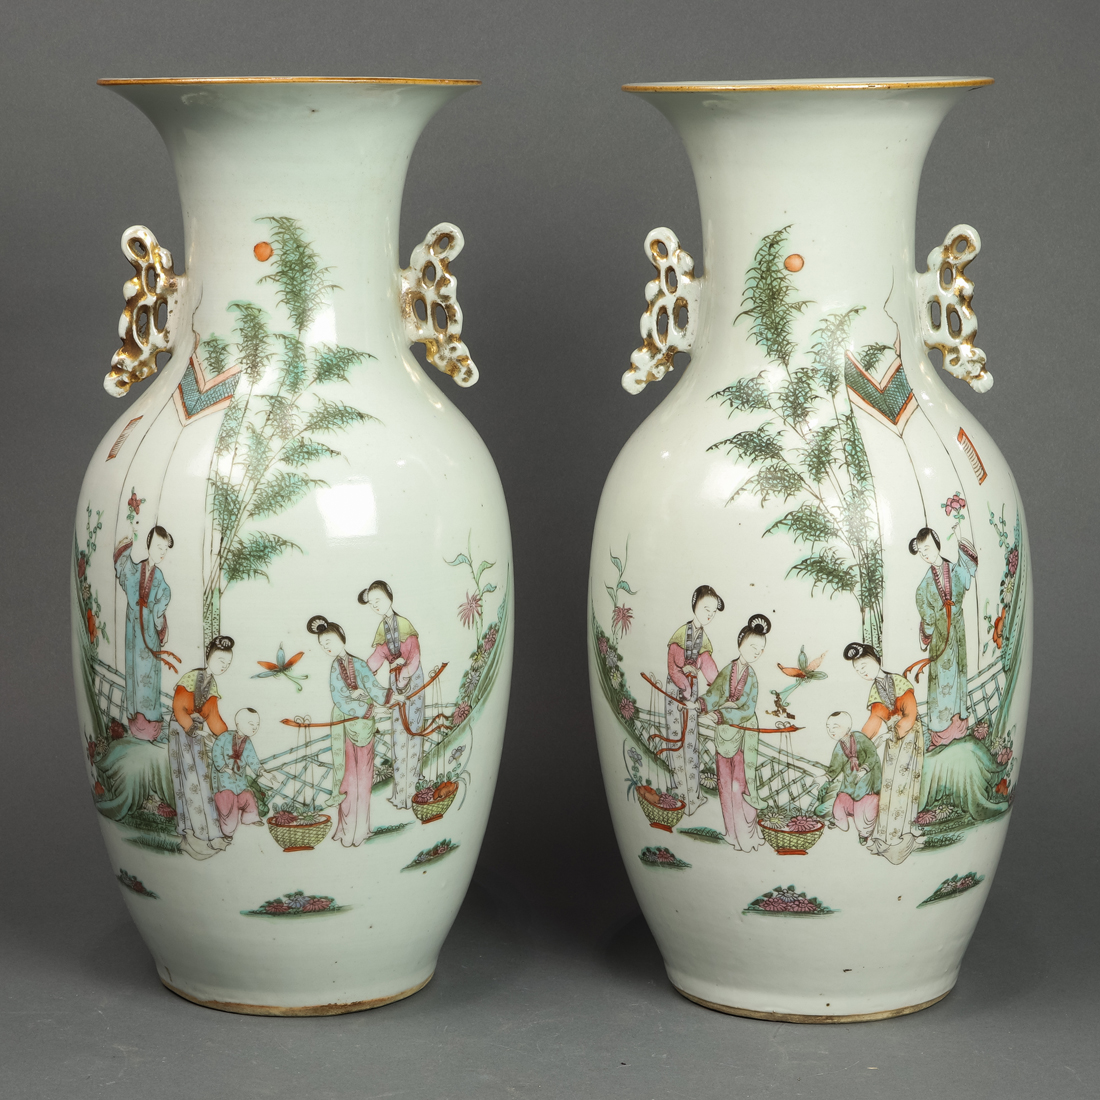 PAIR OF CHINESE FAMILLE ROSE VASES 3a3a4a